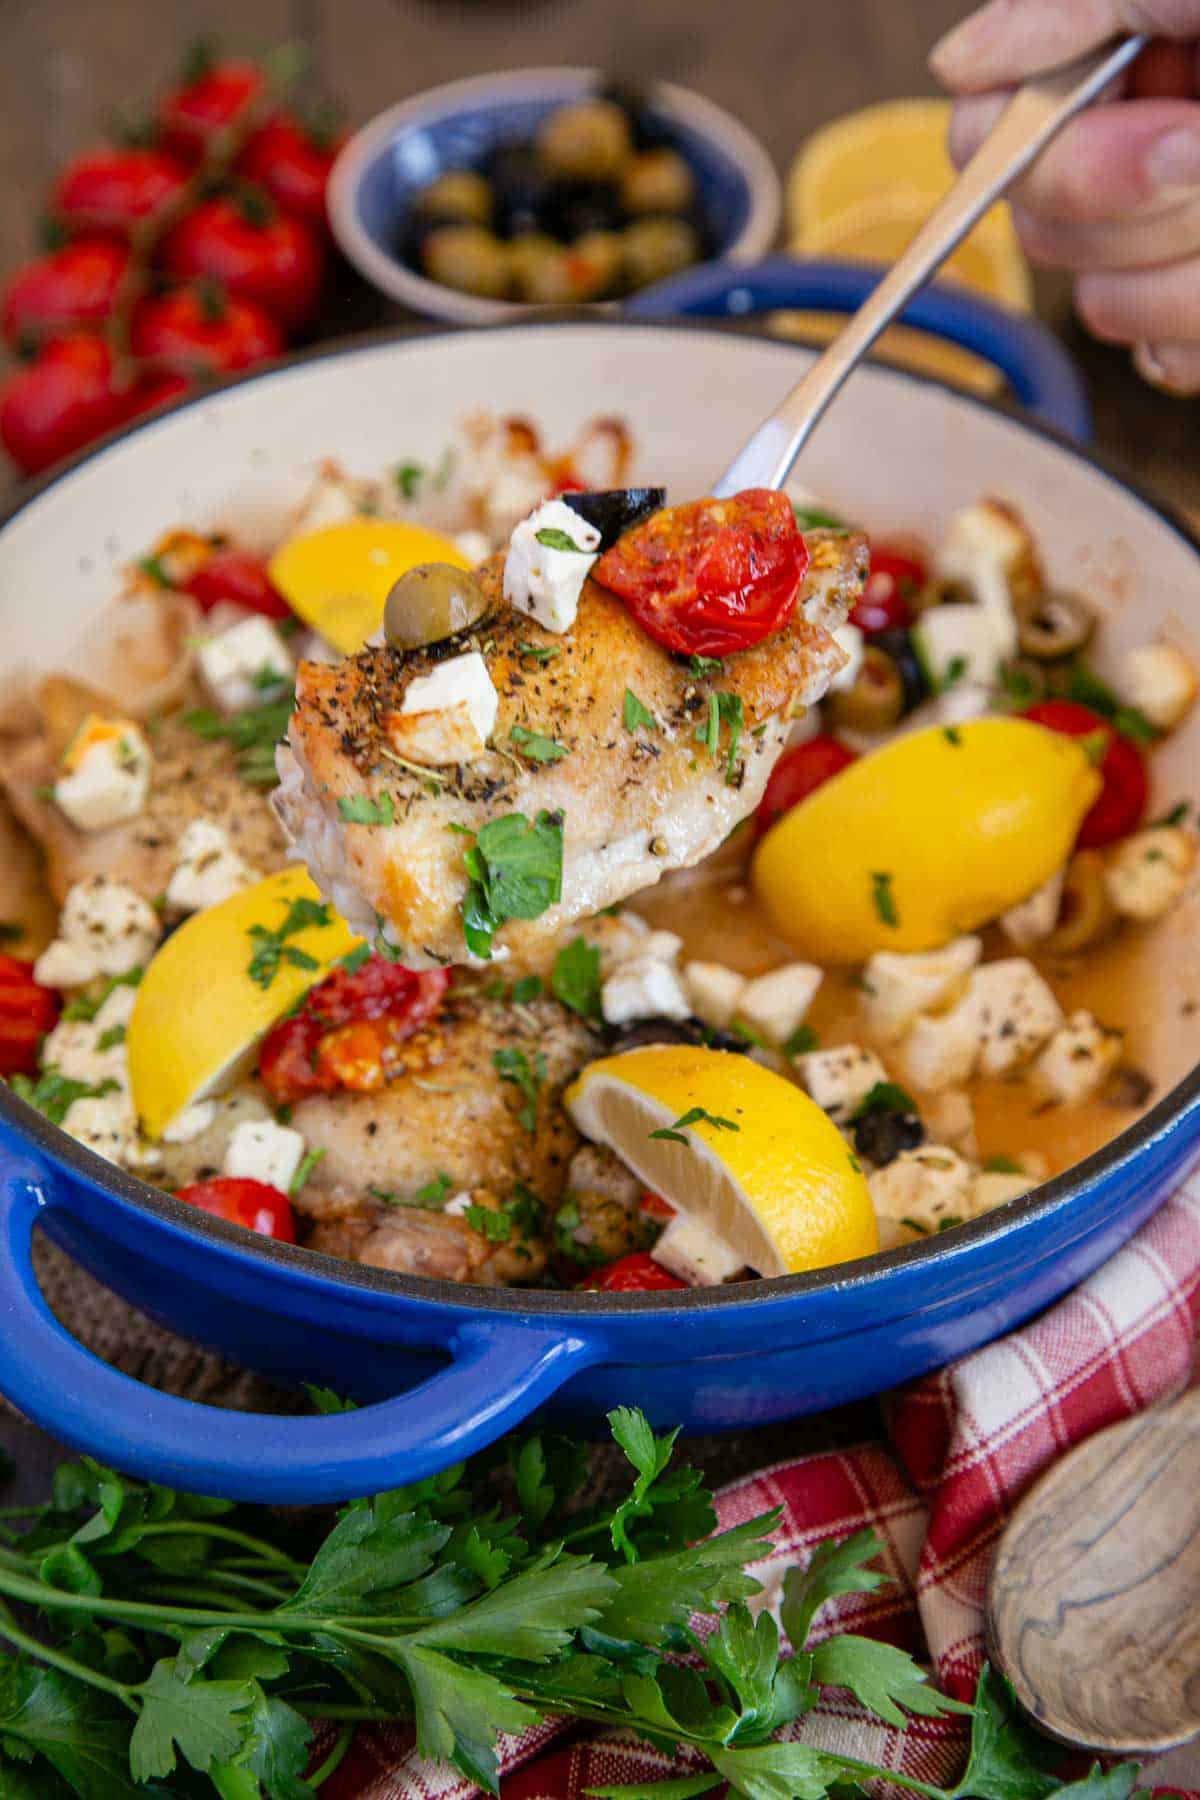 Greek chicken, a burst of colour with lemons, tomatoes, white feta and green herbs all contrasting with the bright blue of the casserole dish.